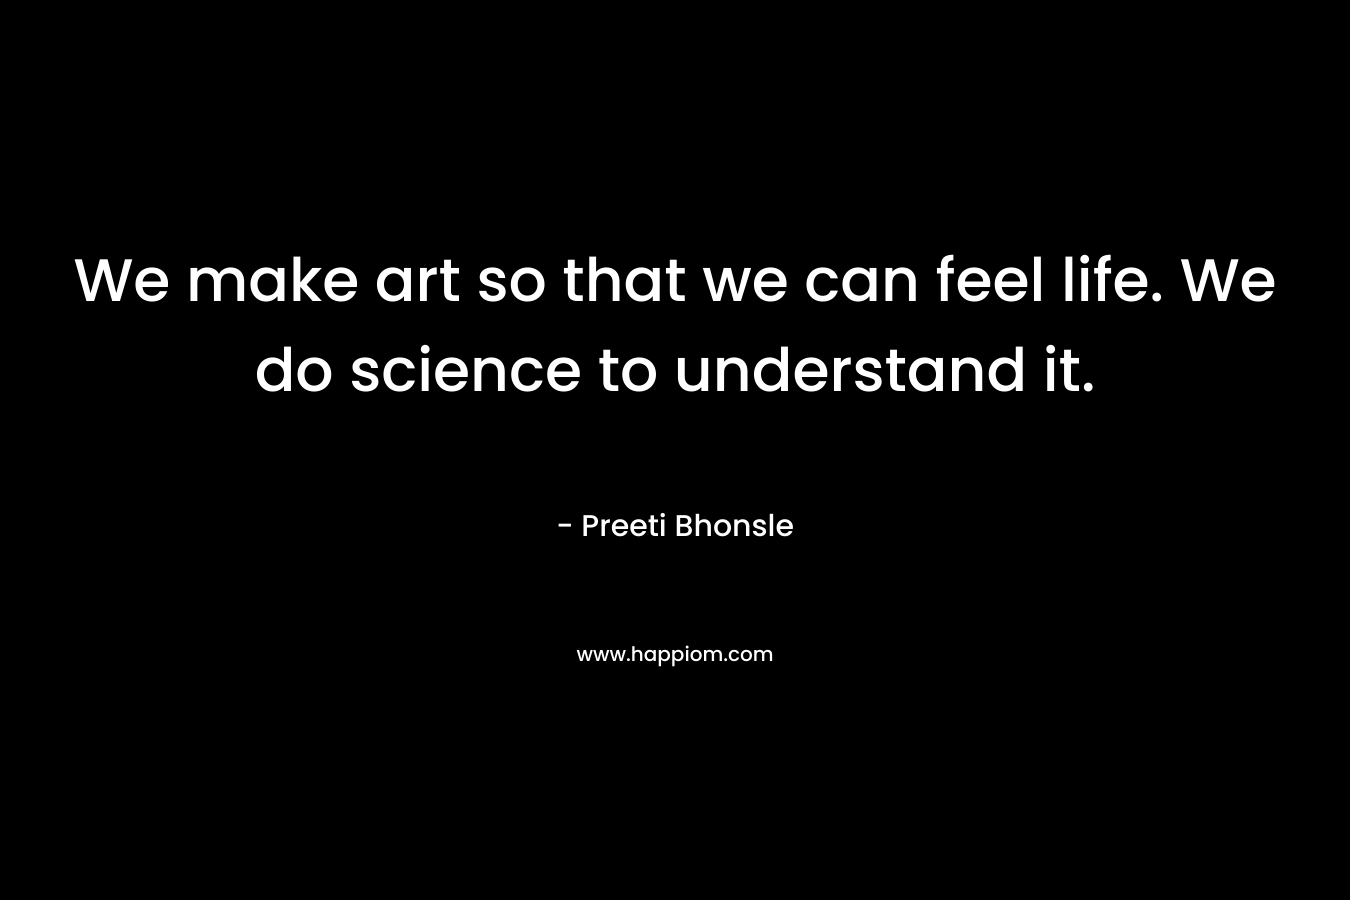 We make art so that we can feel life. We do science to understand it.